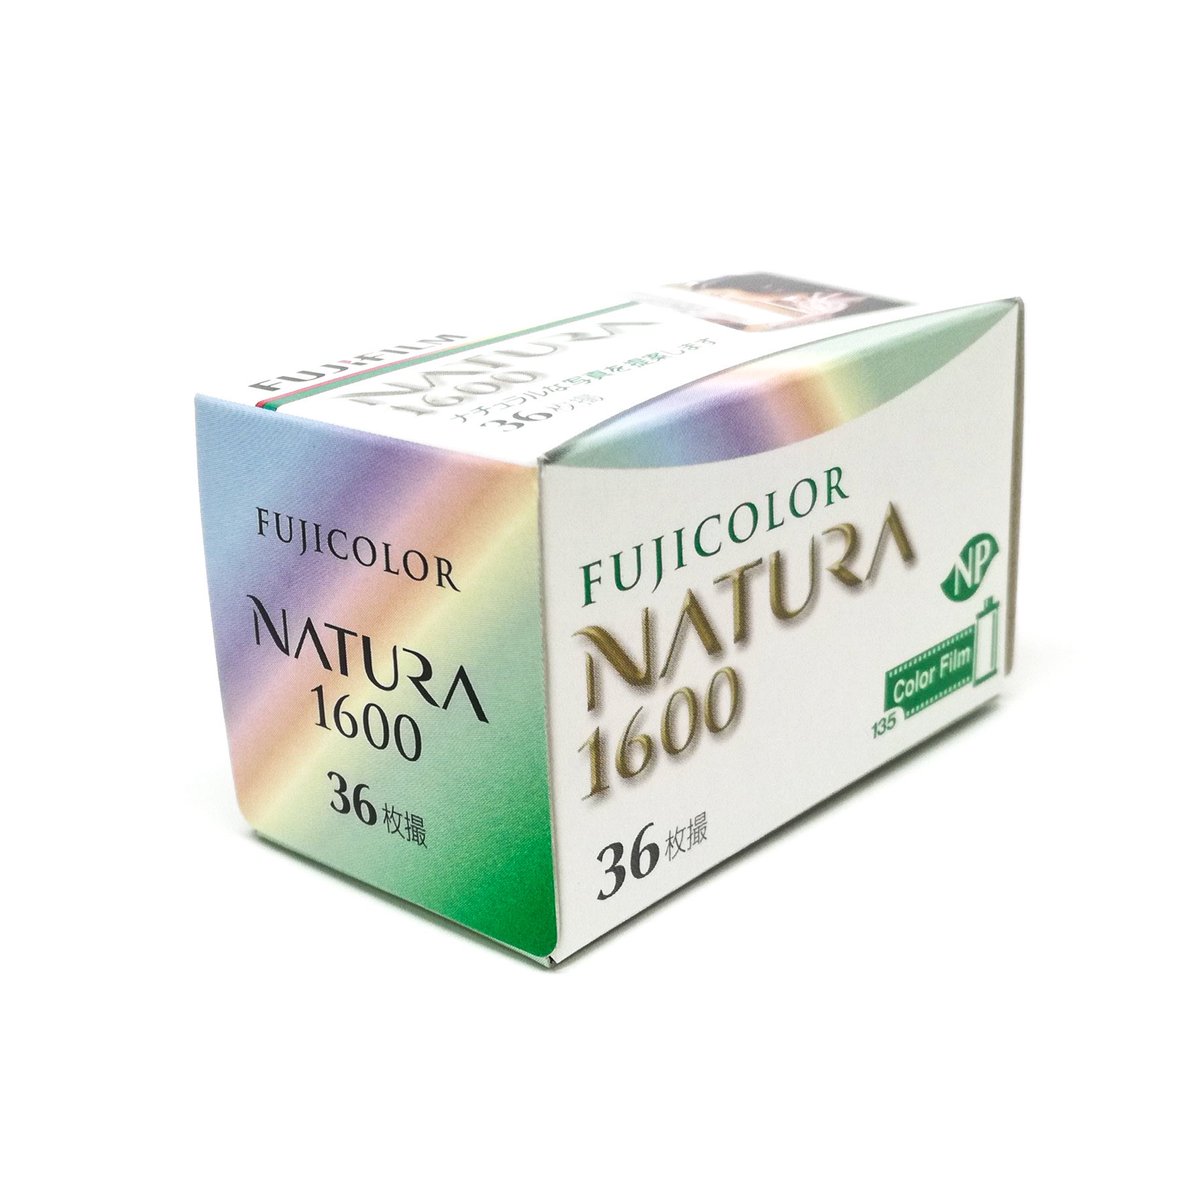 : Fujicolor Natura 1600The colour appeared to be less contrast and slightly red undertone which remind me of my experience with Natura before. It has less grain for high ISO. #NCT카메라  #태일  #쟈니  #해찬  #엔시티  #NCTOGRAPHY  #JOHNNY  #TAEIL  #HAECHAN  #NCT127  #35mm